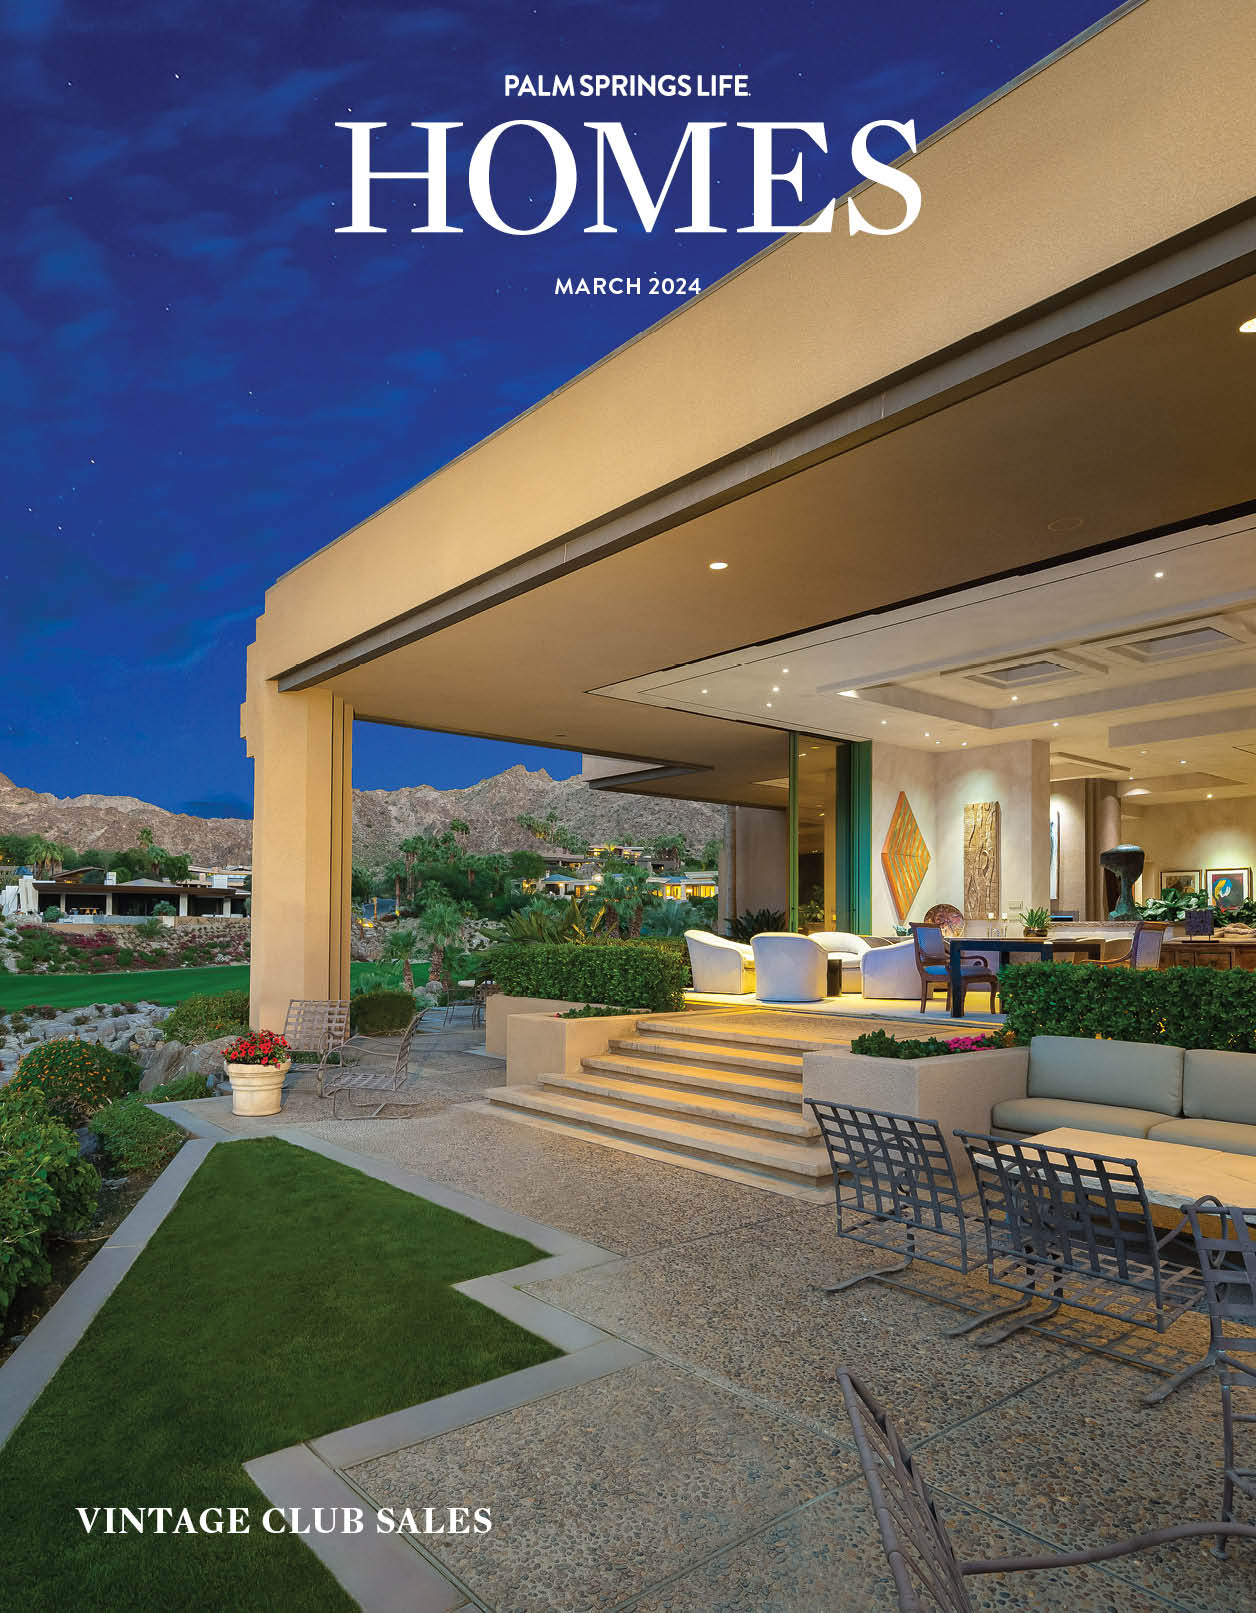 Palm Springs Life HOMES March 2024